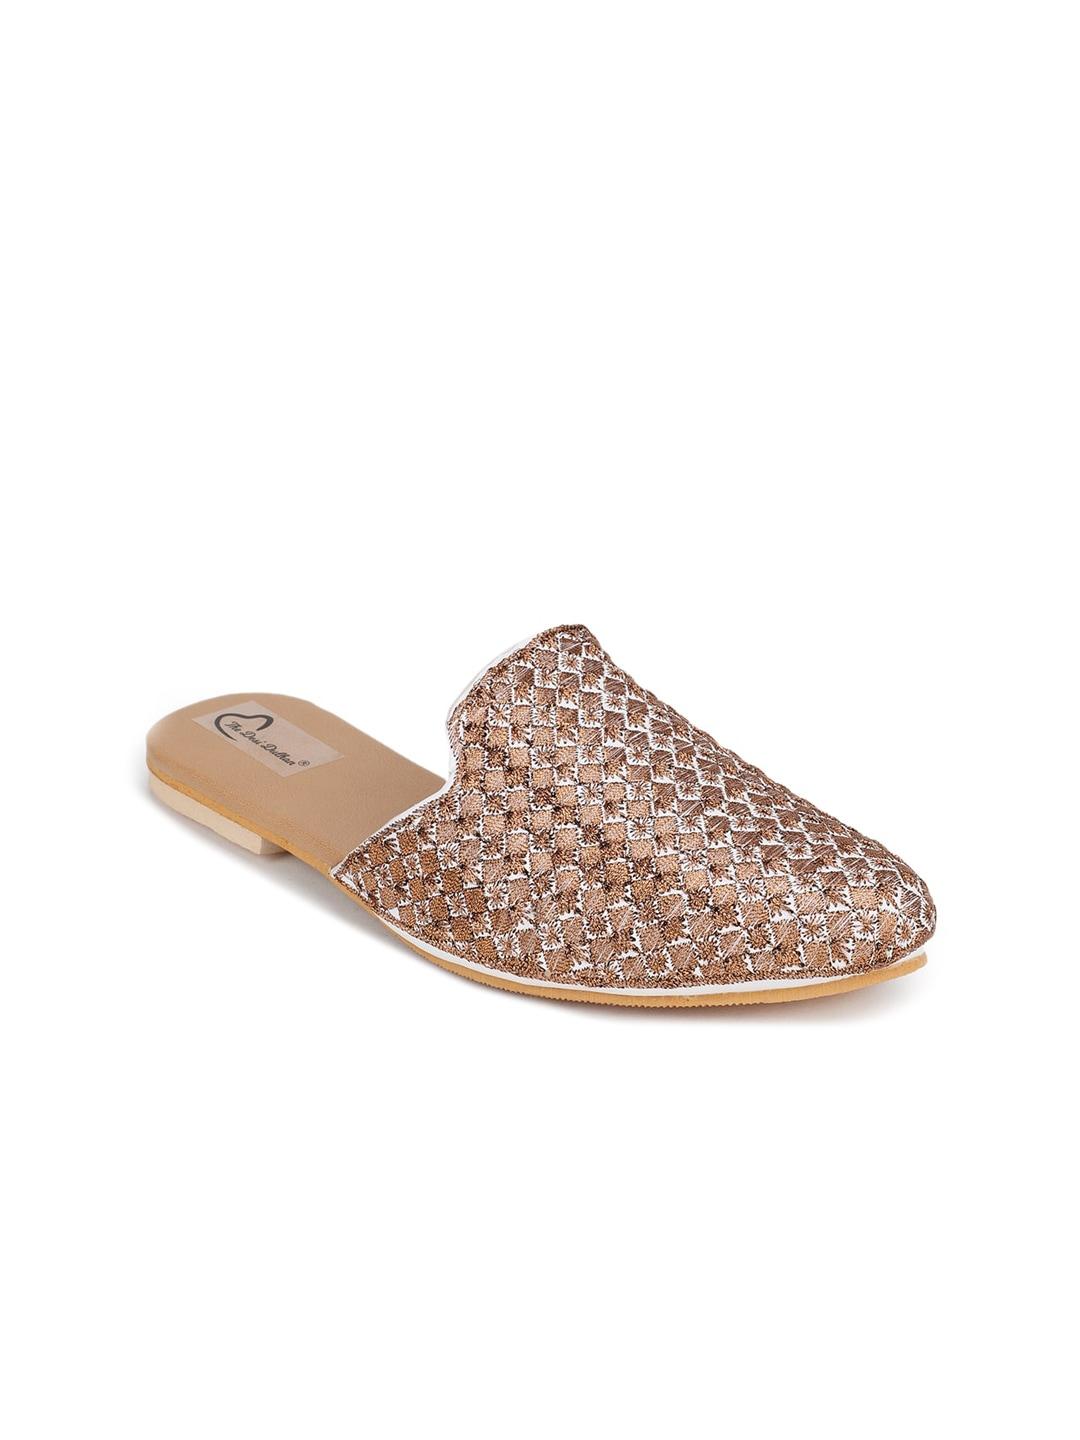 the-desi-dulhan-women-copper-toned-textured-leather-ethnic-flats